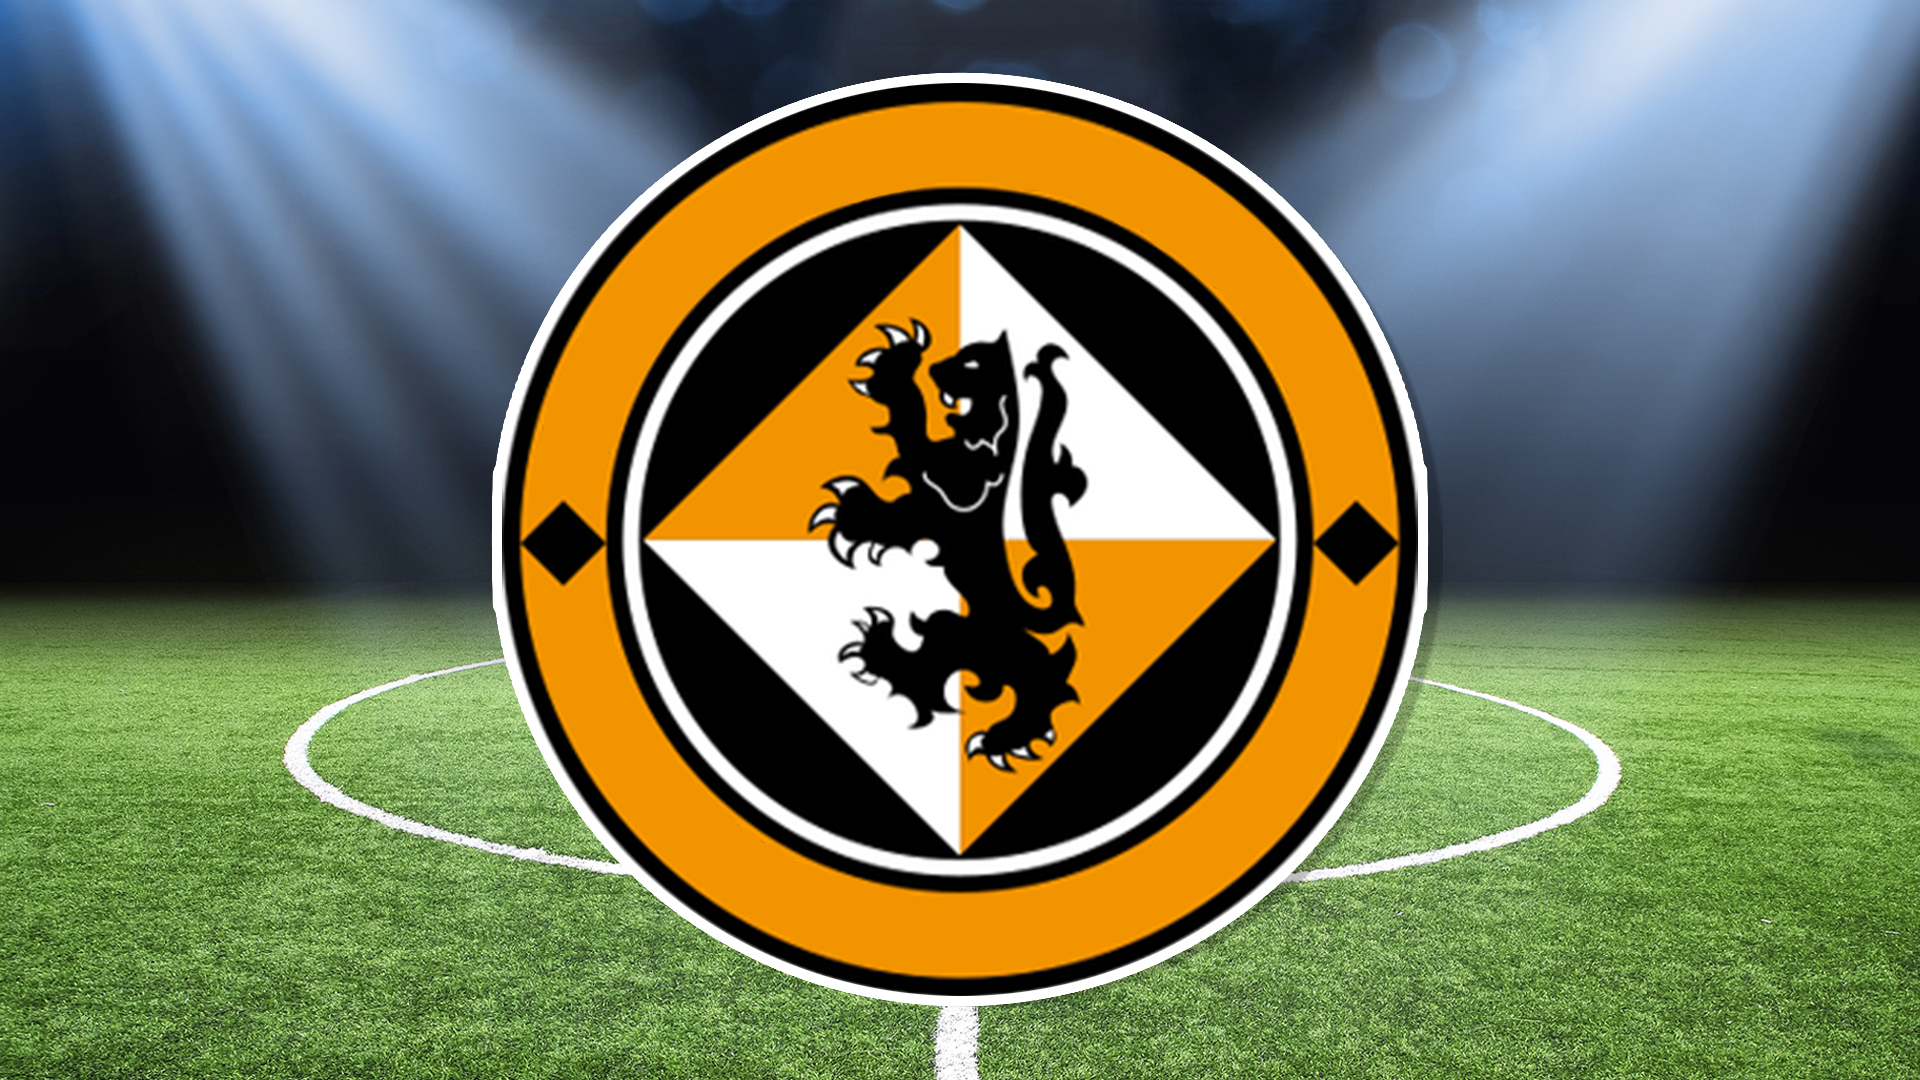 Football Quiz - Can You Guess The Football Club Badge? 